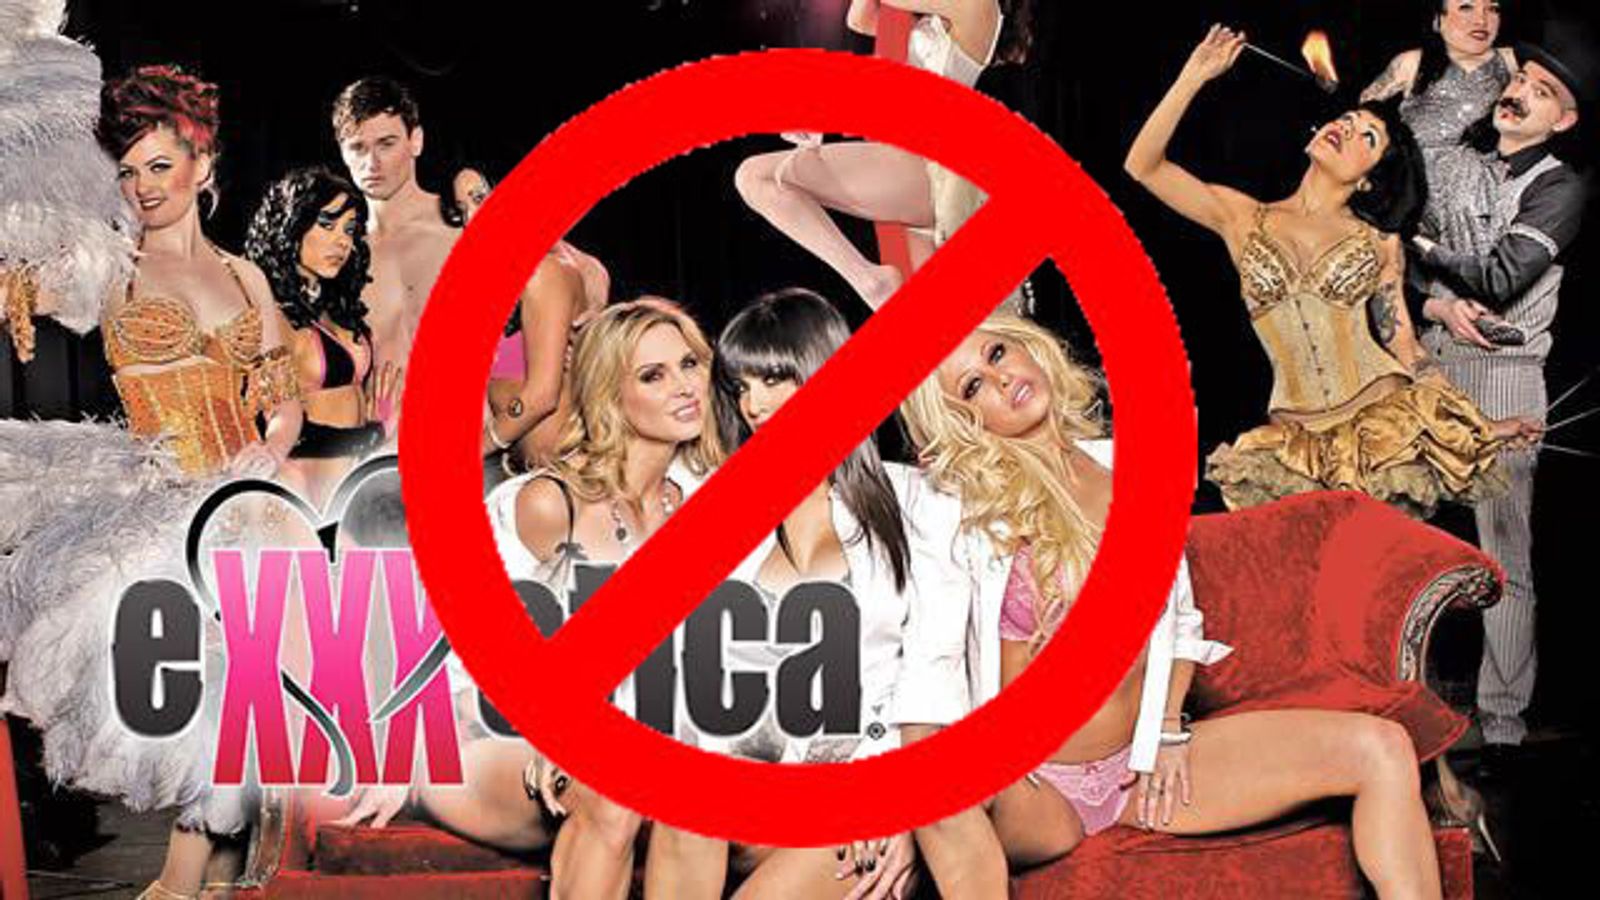 Dallas Responds to Exxxotica's Motion for Preliminary Injunction